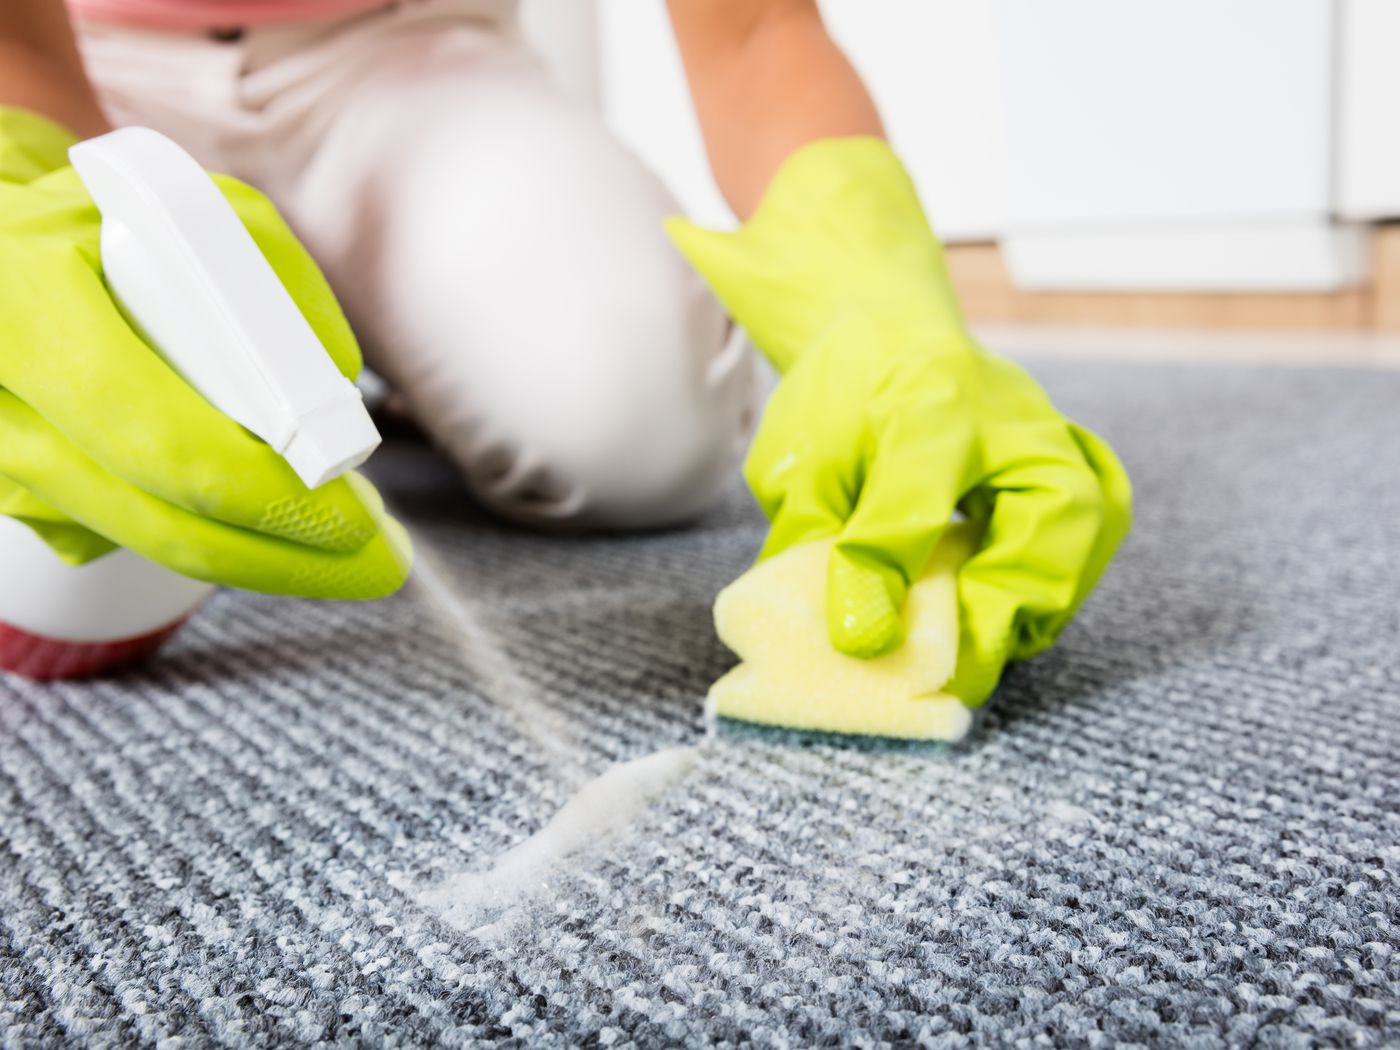 How to Get Old Stains Out of Carpet - Under the Rug Floor Care